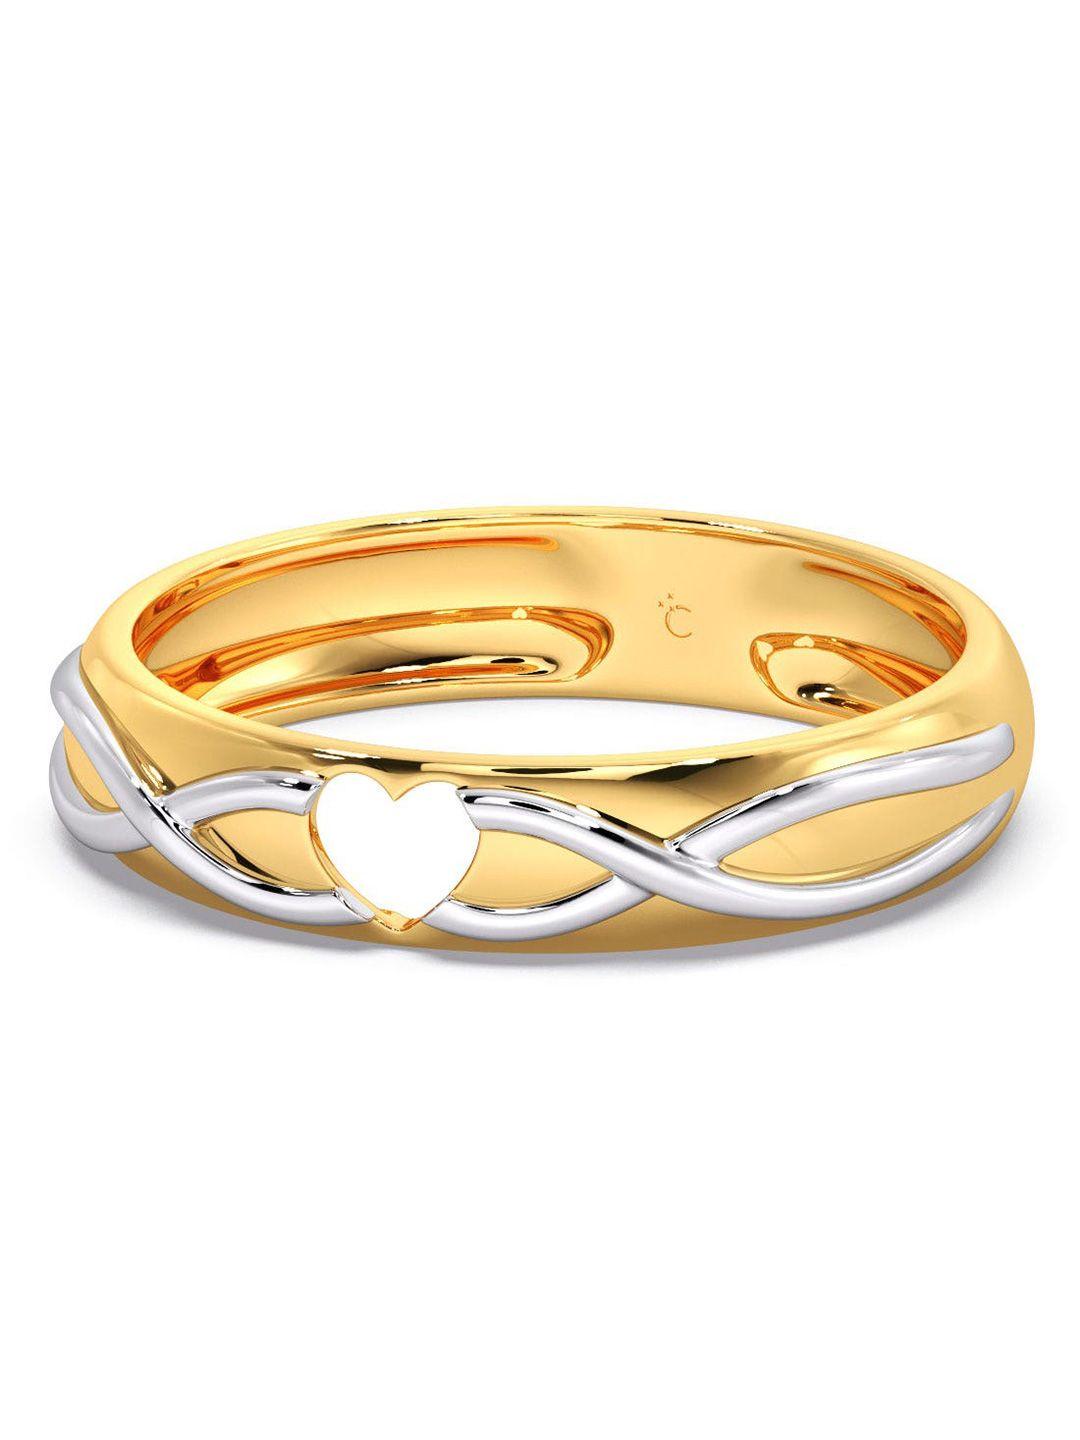 candere a kalyan jewellers company 14kt gold finger ring-2.84gm